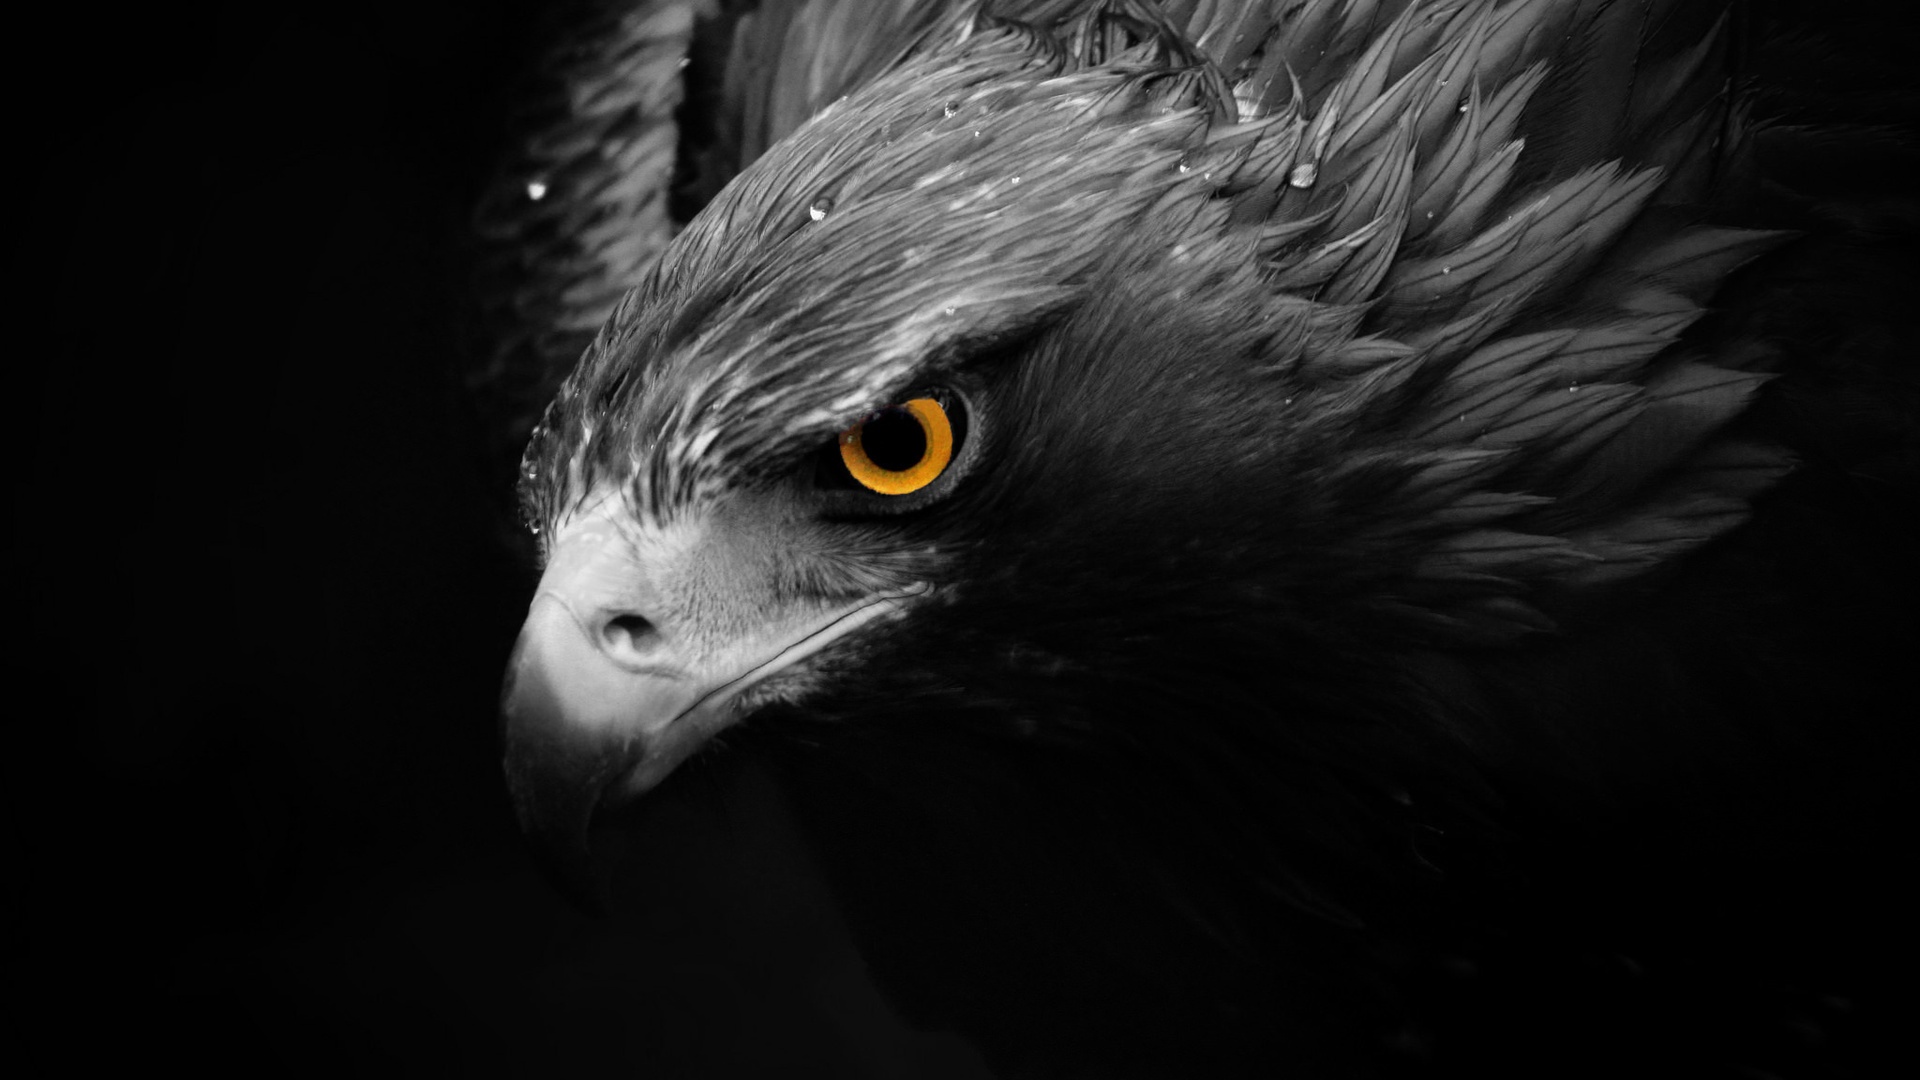 80+ Eagle wallpapers HD | Download Free backgrounds